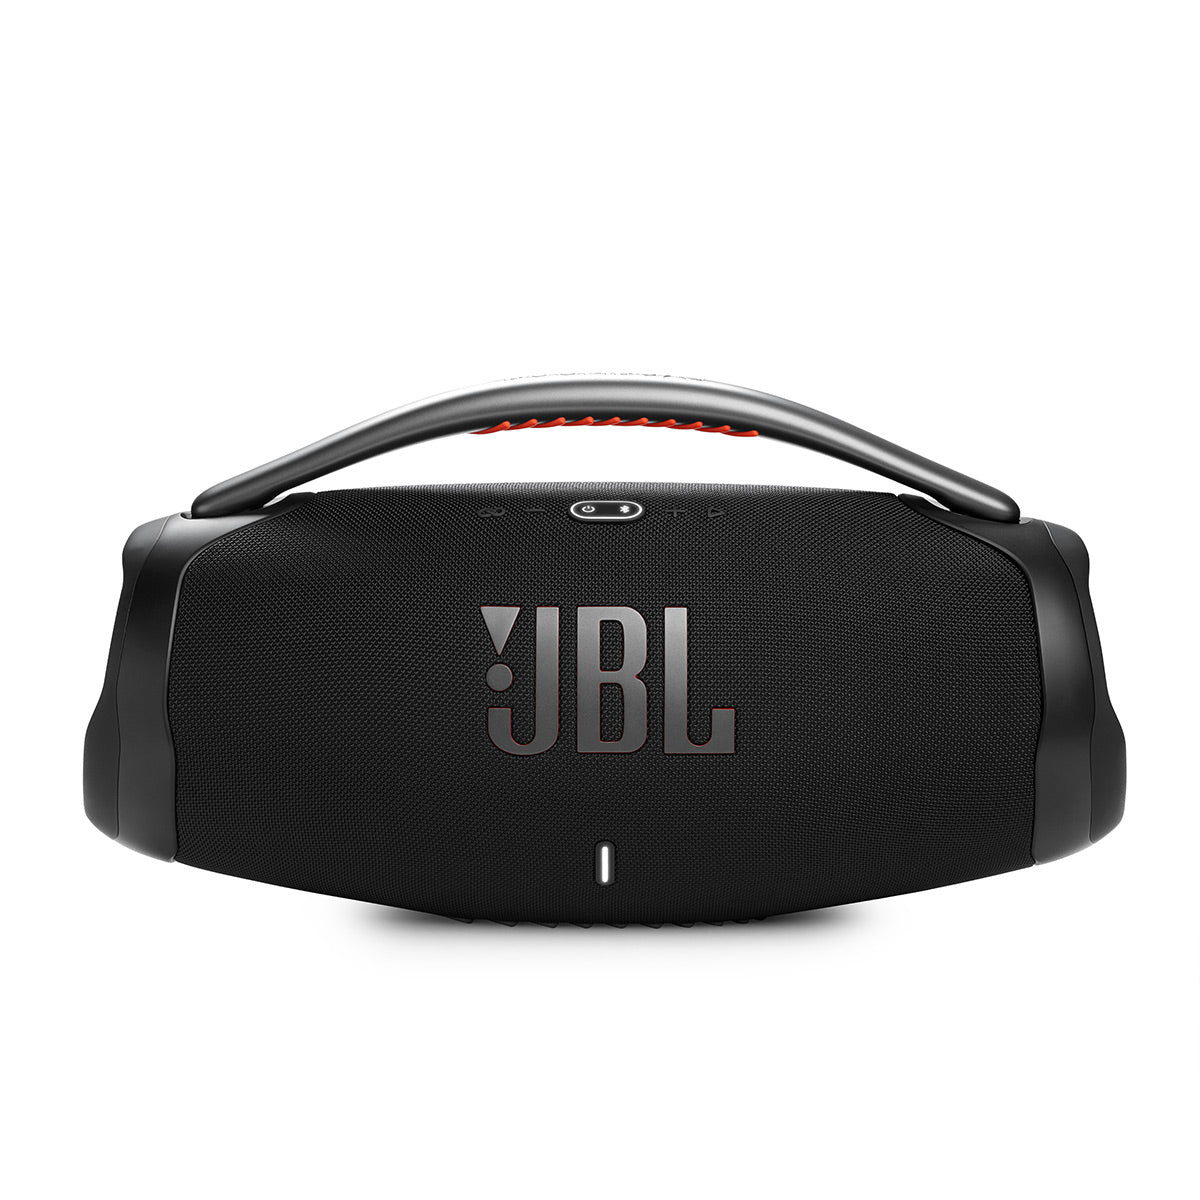 JBL's Boombox 3: More bass, more loud, just more! 